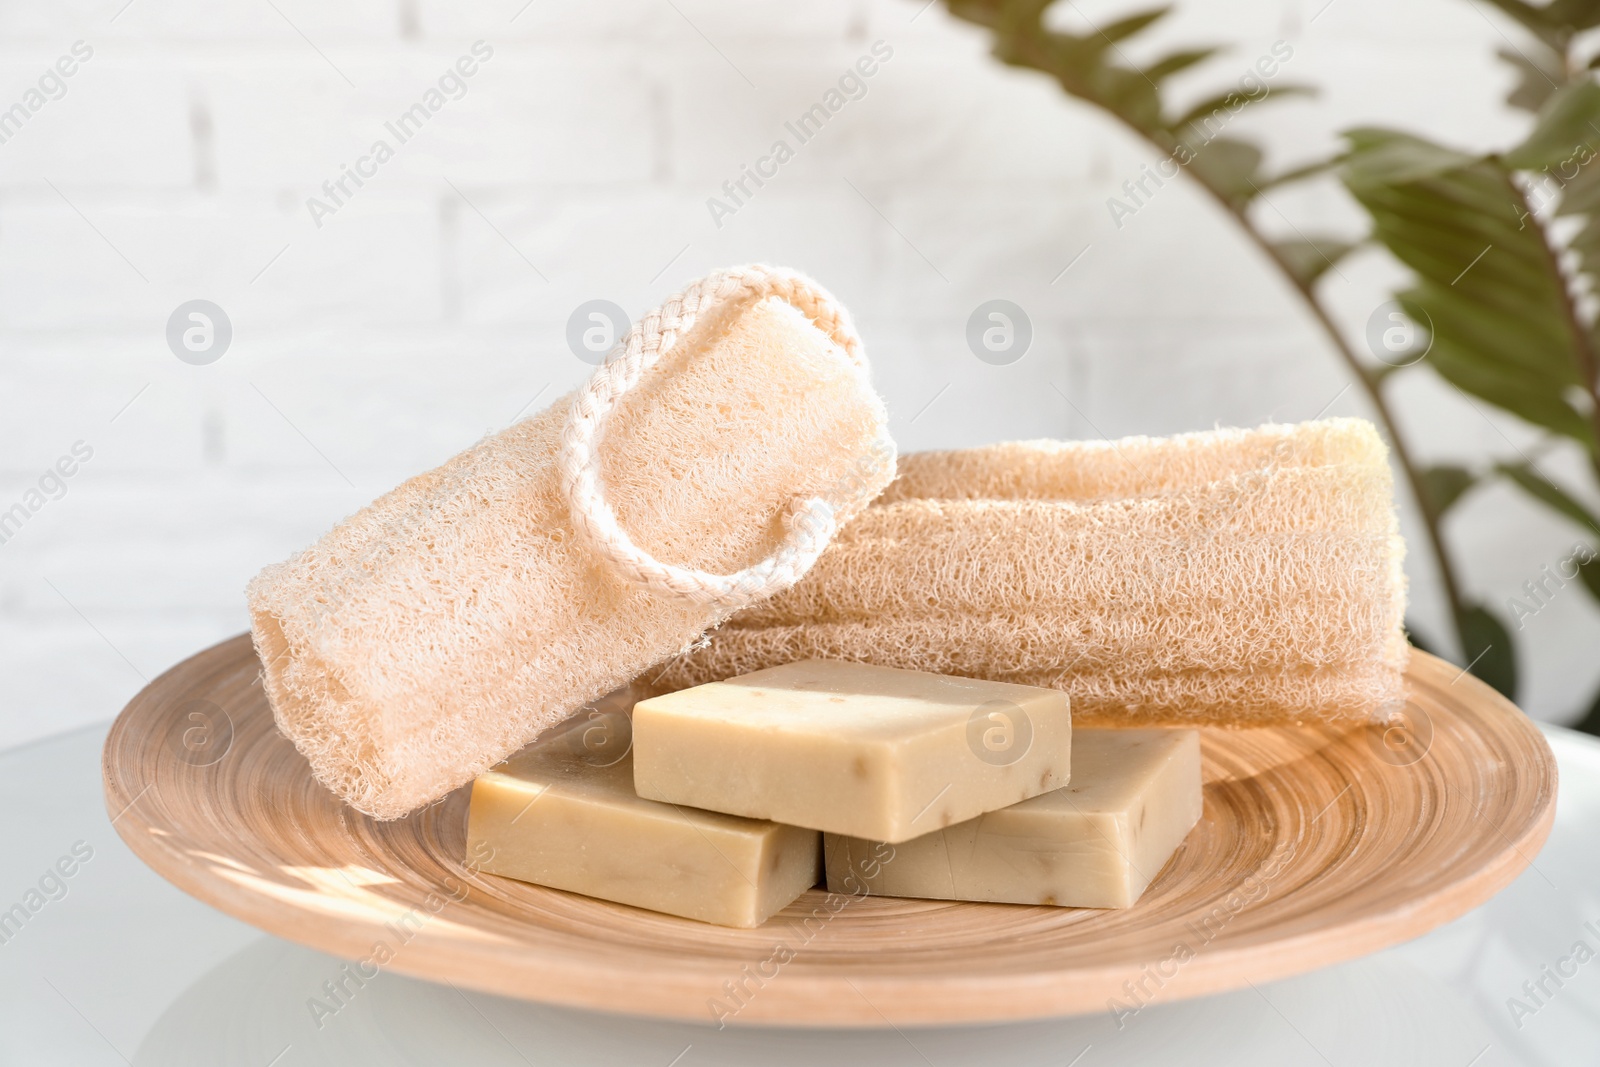 Photo of Plate with handmade soap bars and sponges on table